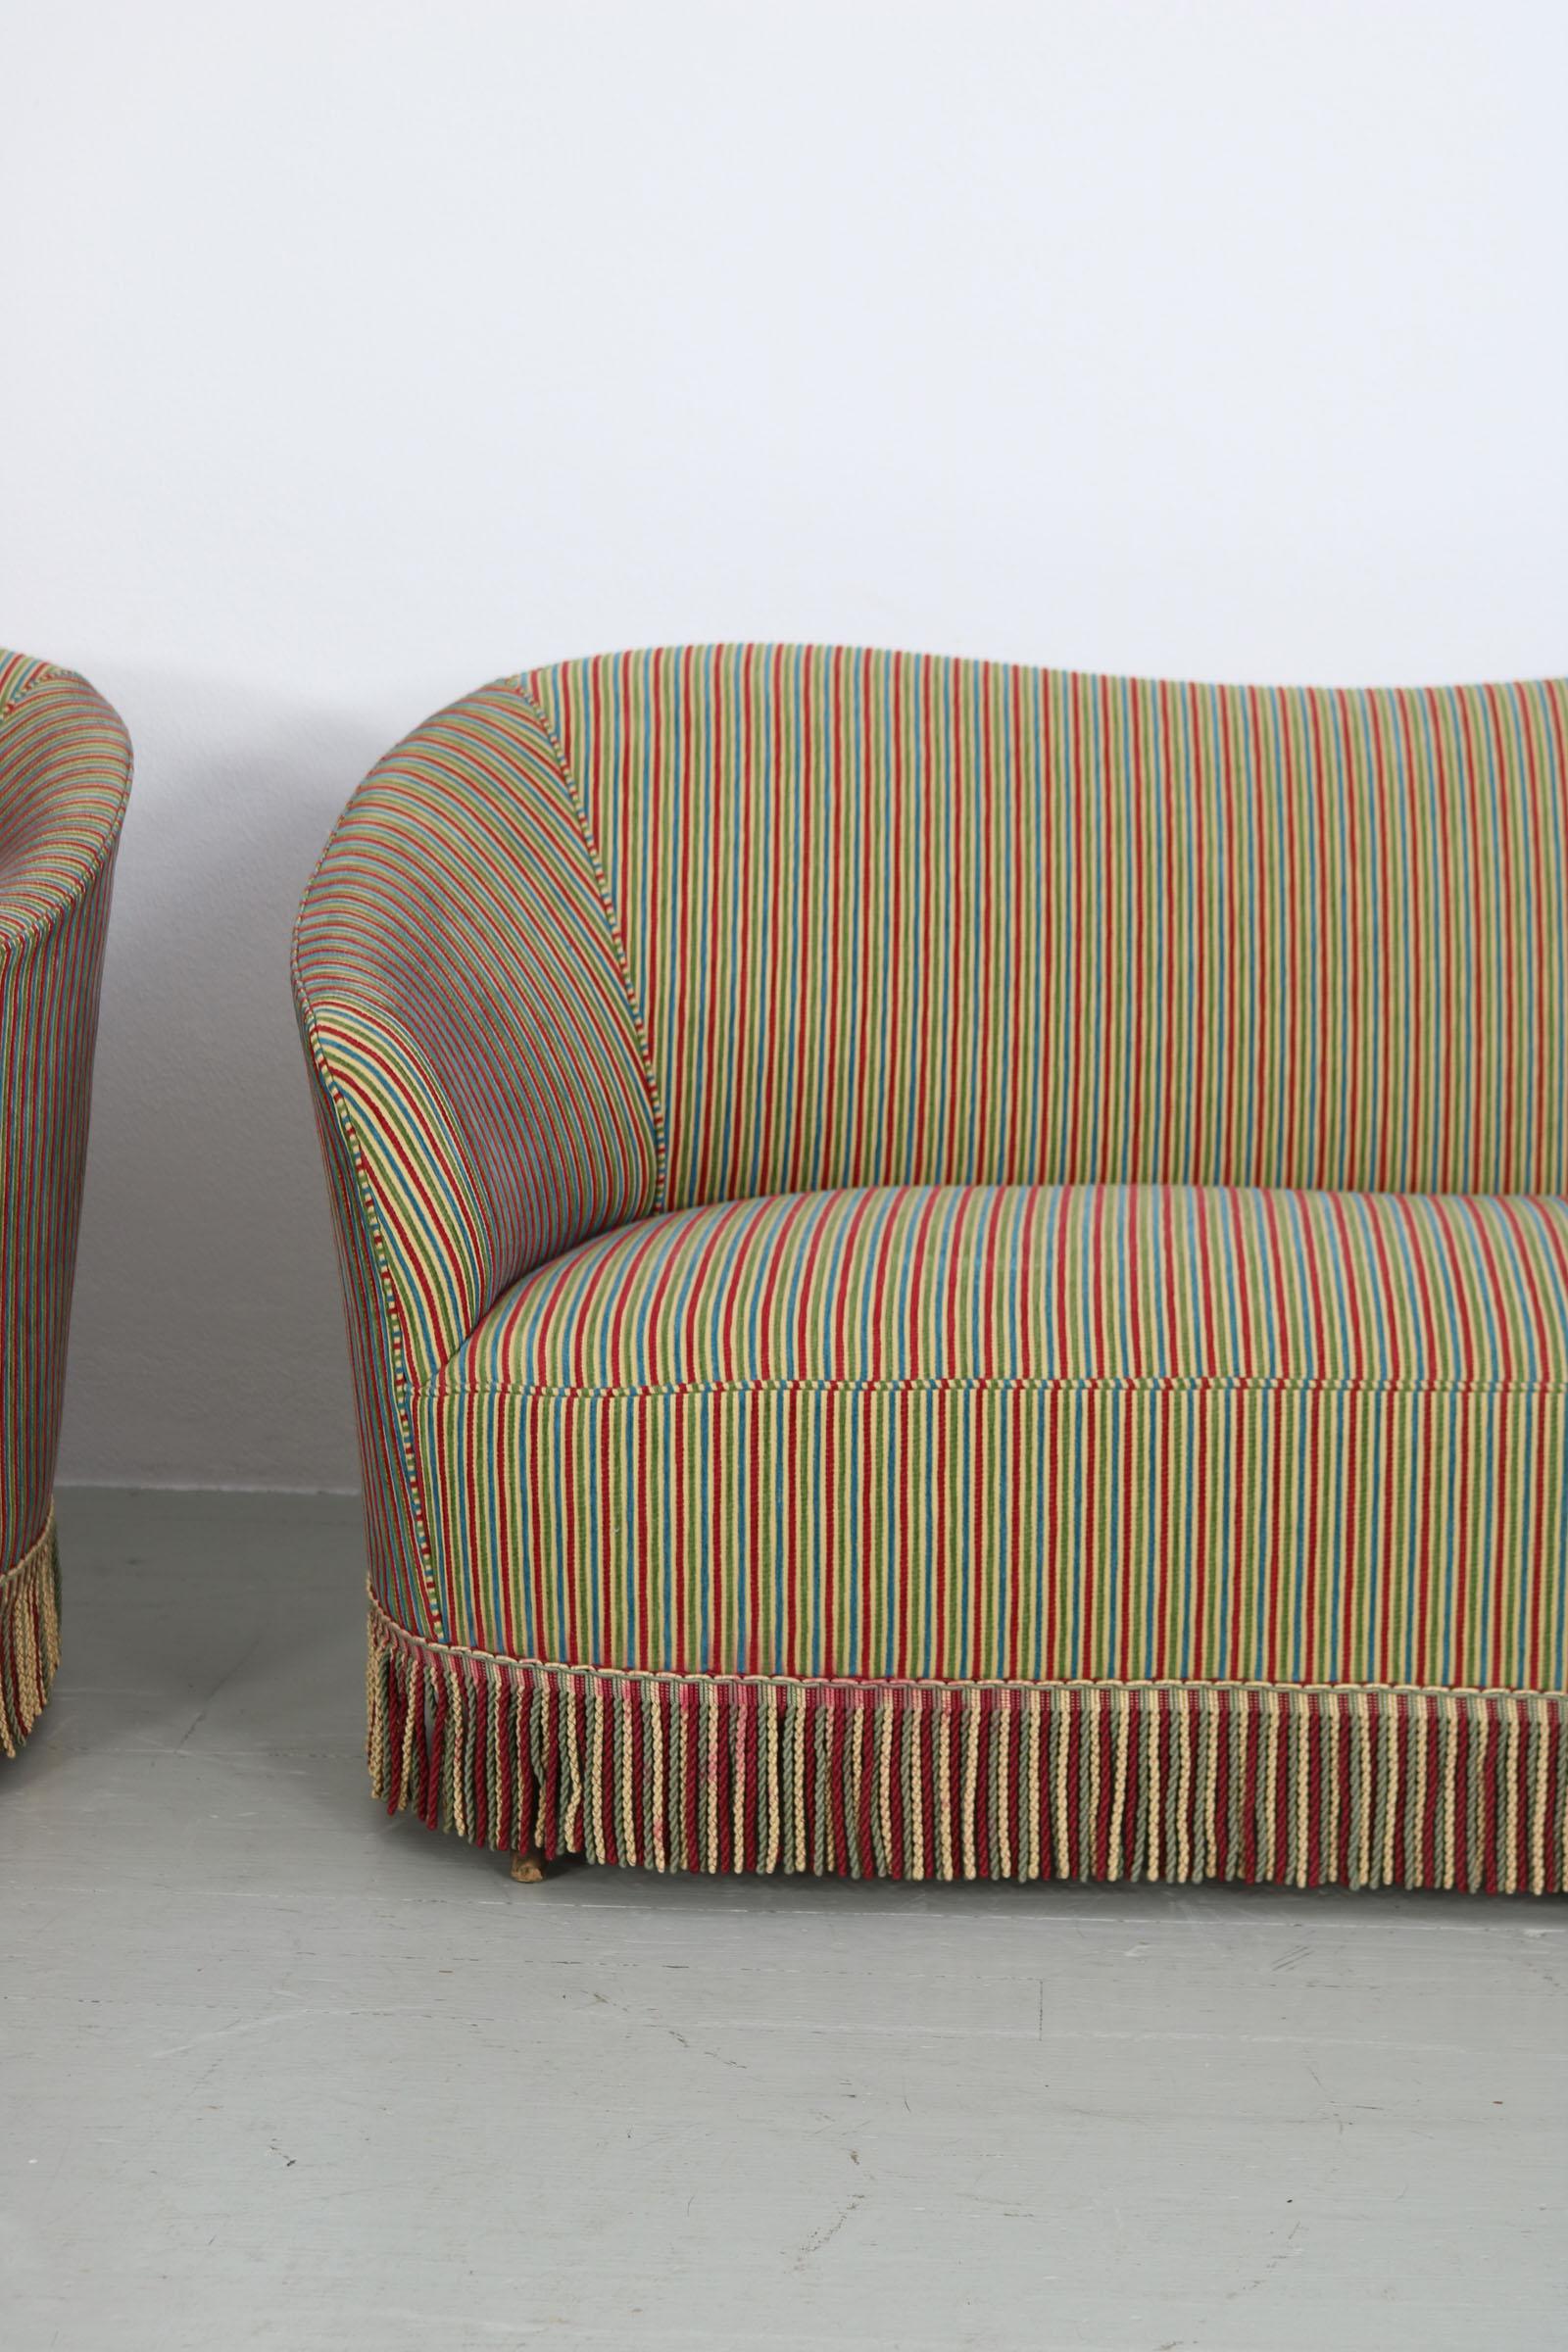 Set of 2 Sofas with Fabric by Fede Cheti, Italy 1940s For Sale 8